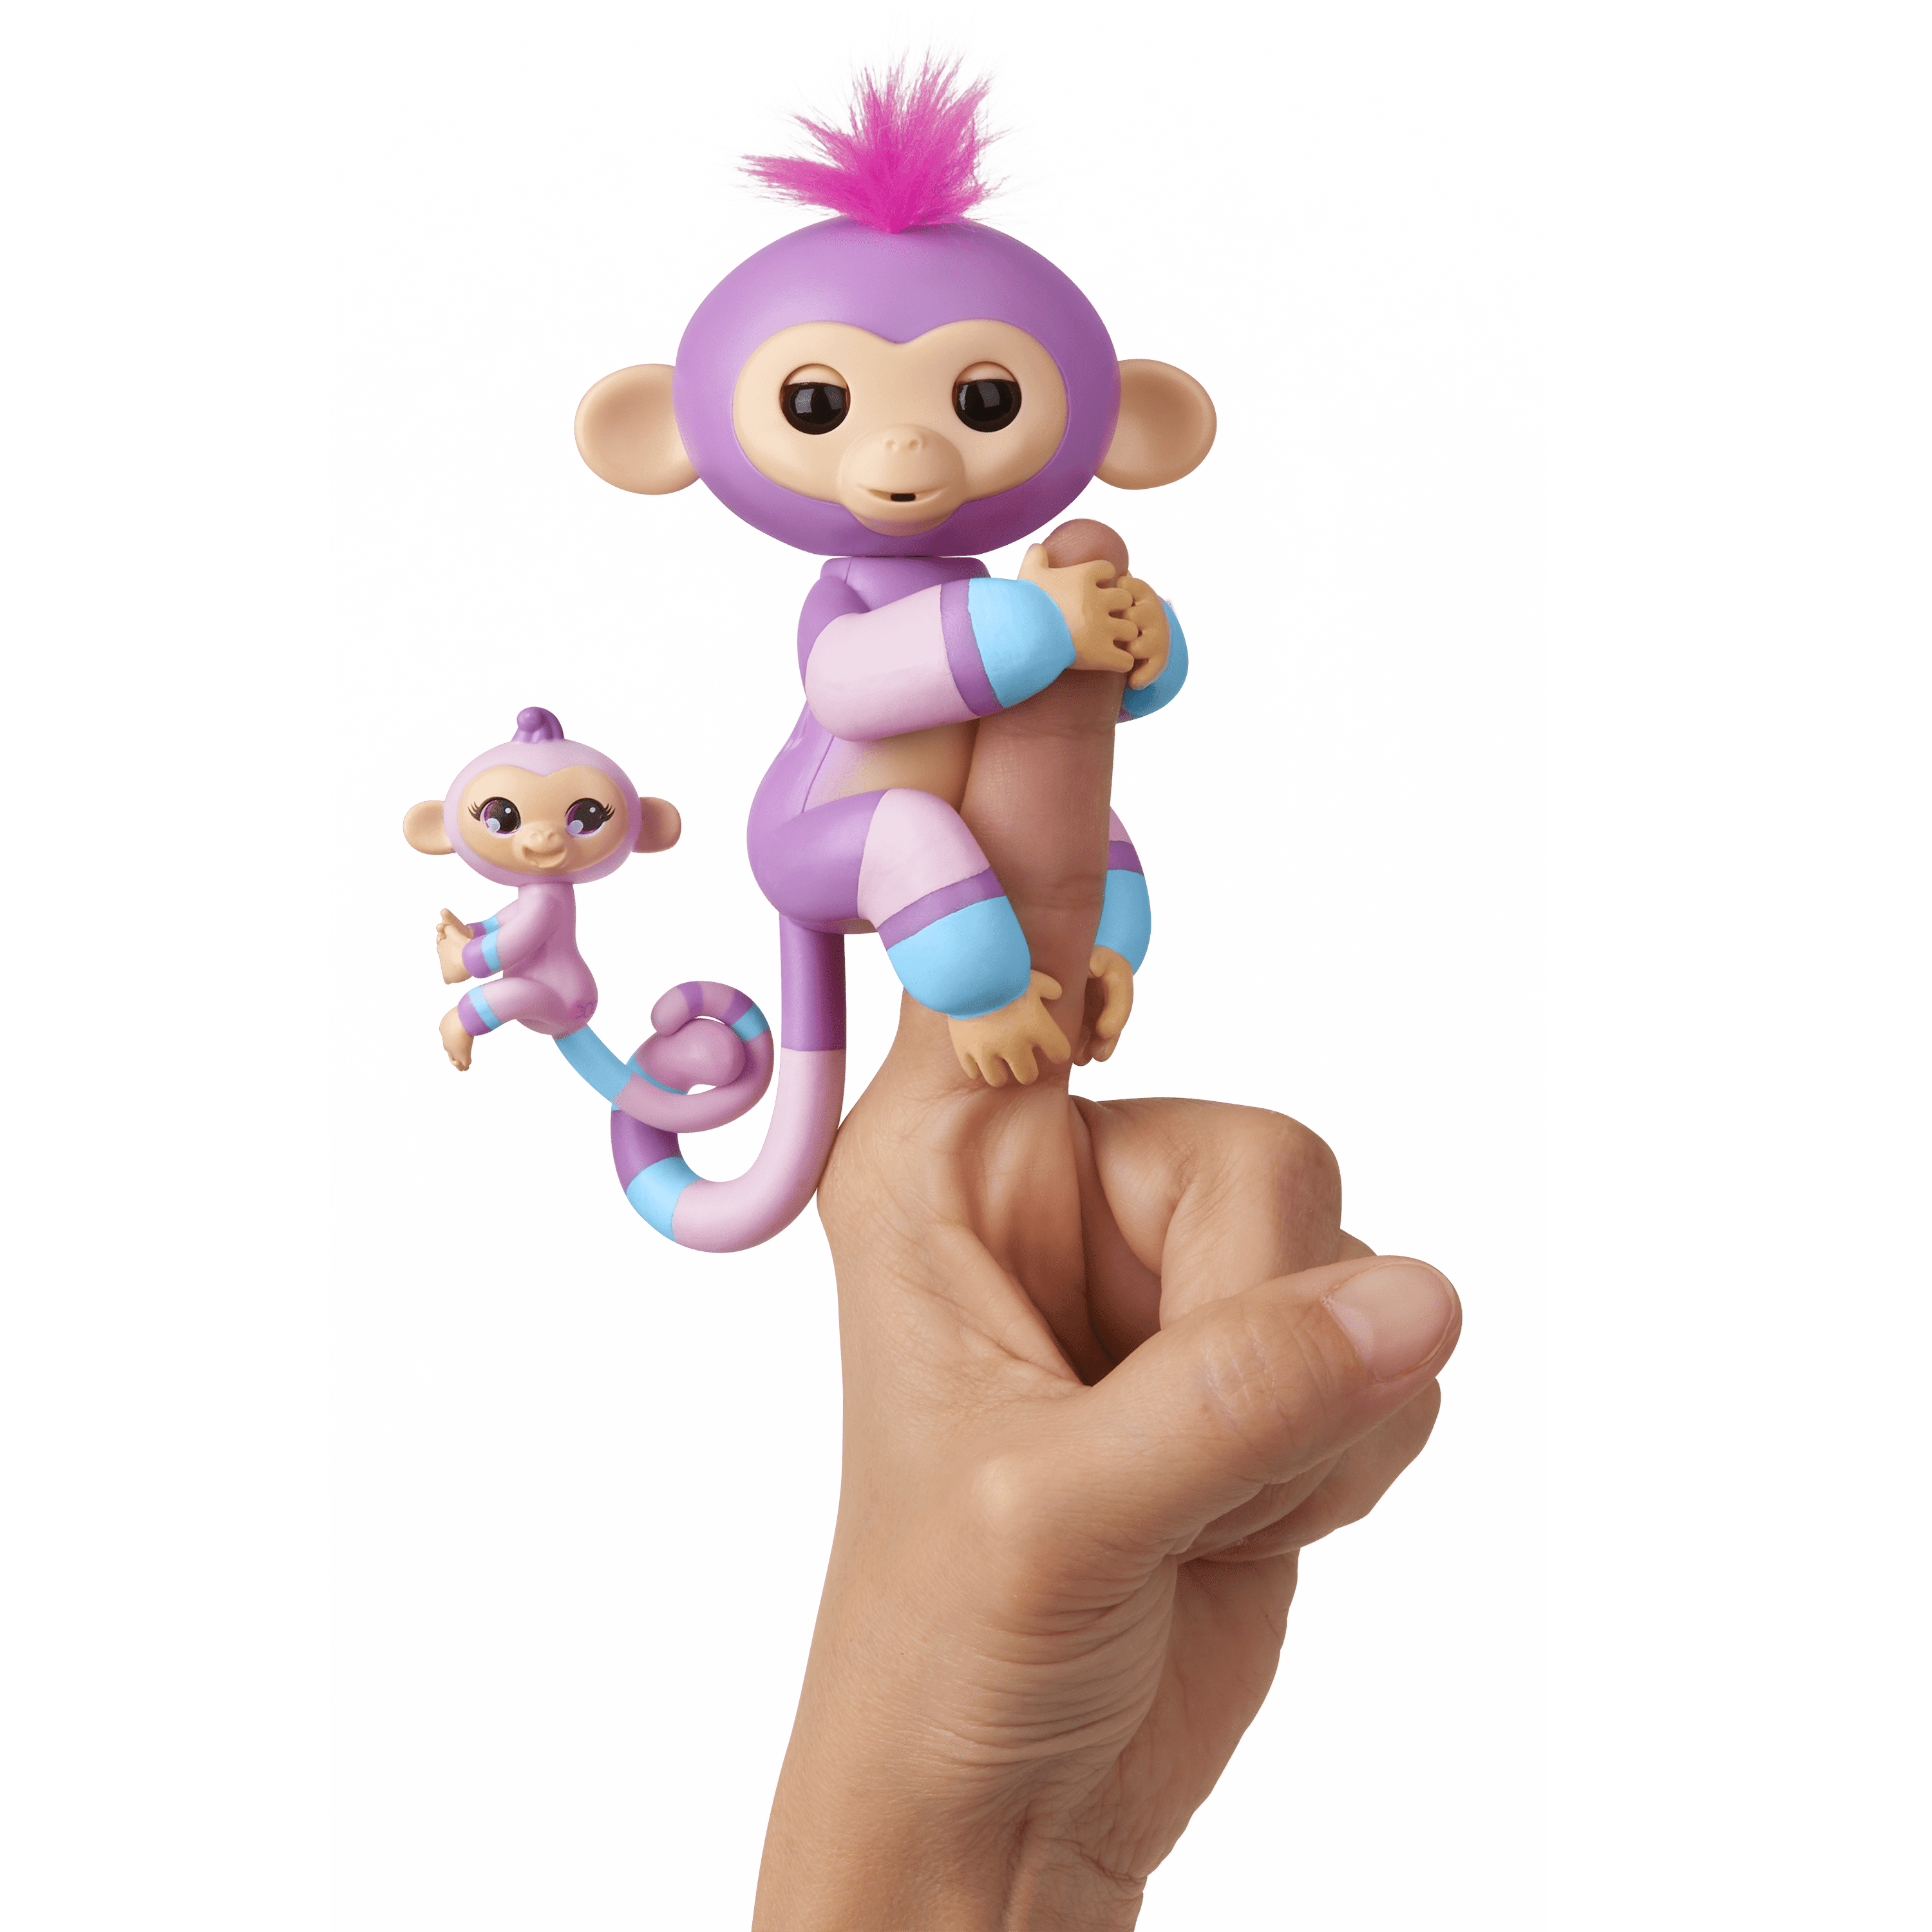 24 Replacement Batteries For WowWee Fingerlings Electronic Baby Monkey Unicorn 